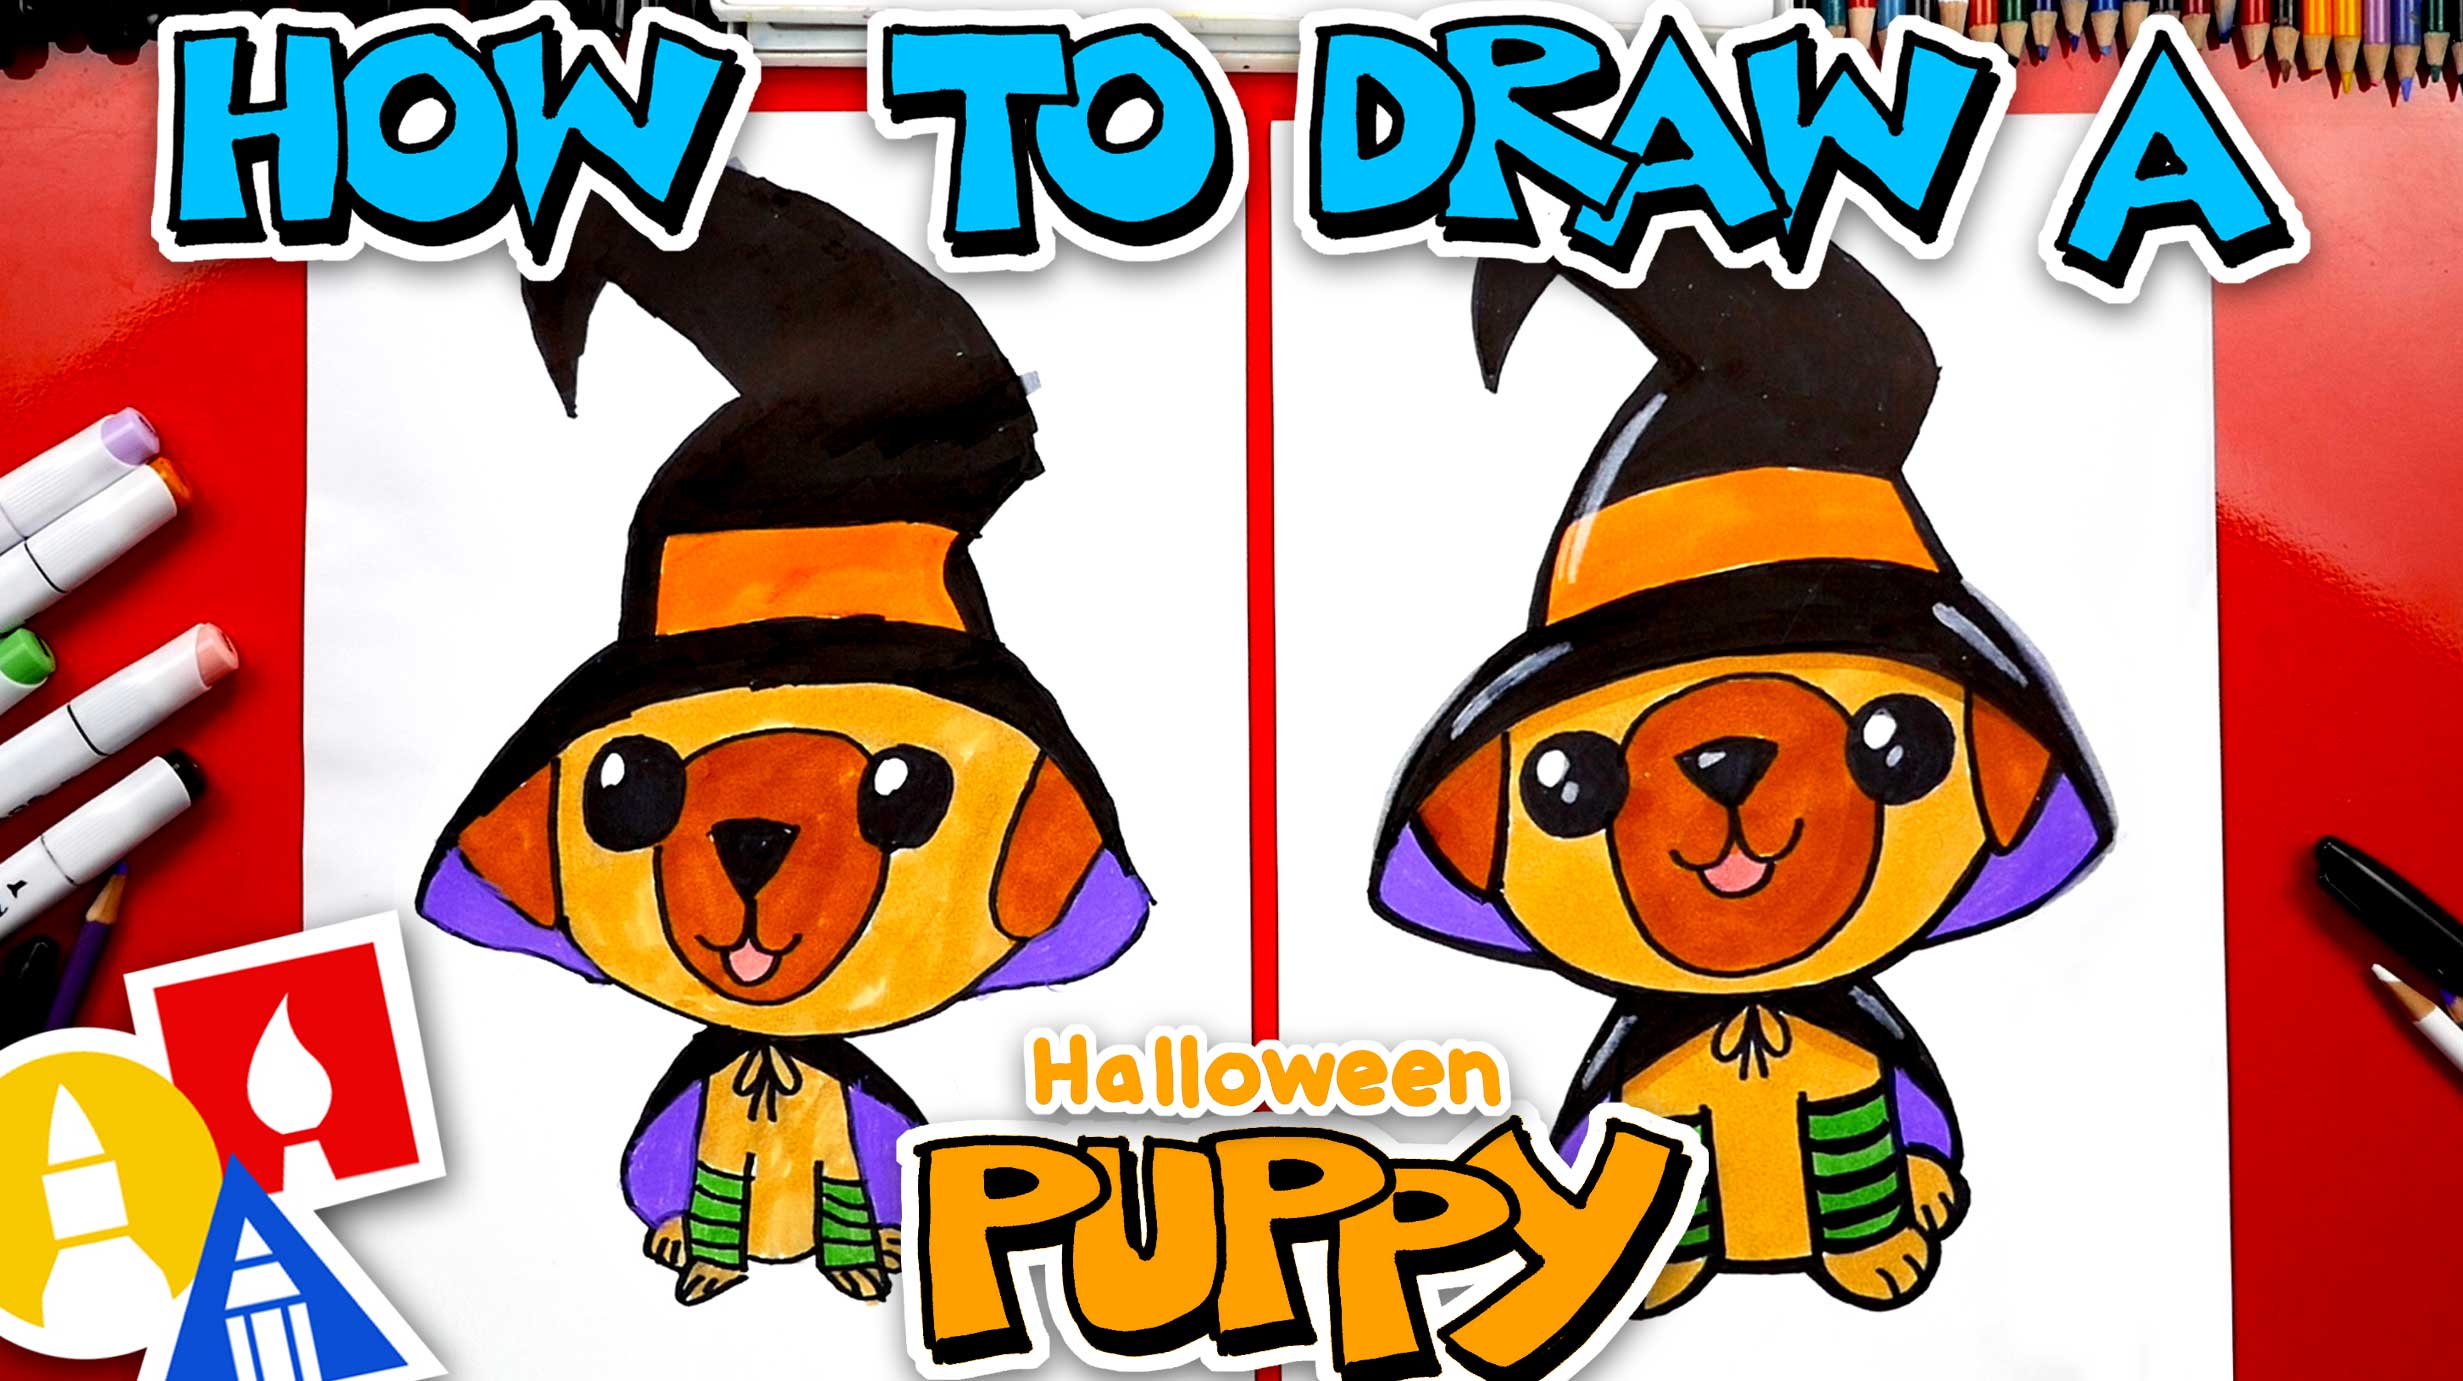 How To Draw A Halloween Puppy Witch - Art For Kids Hub